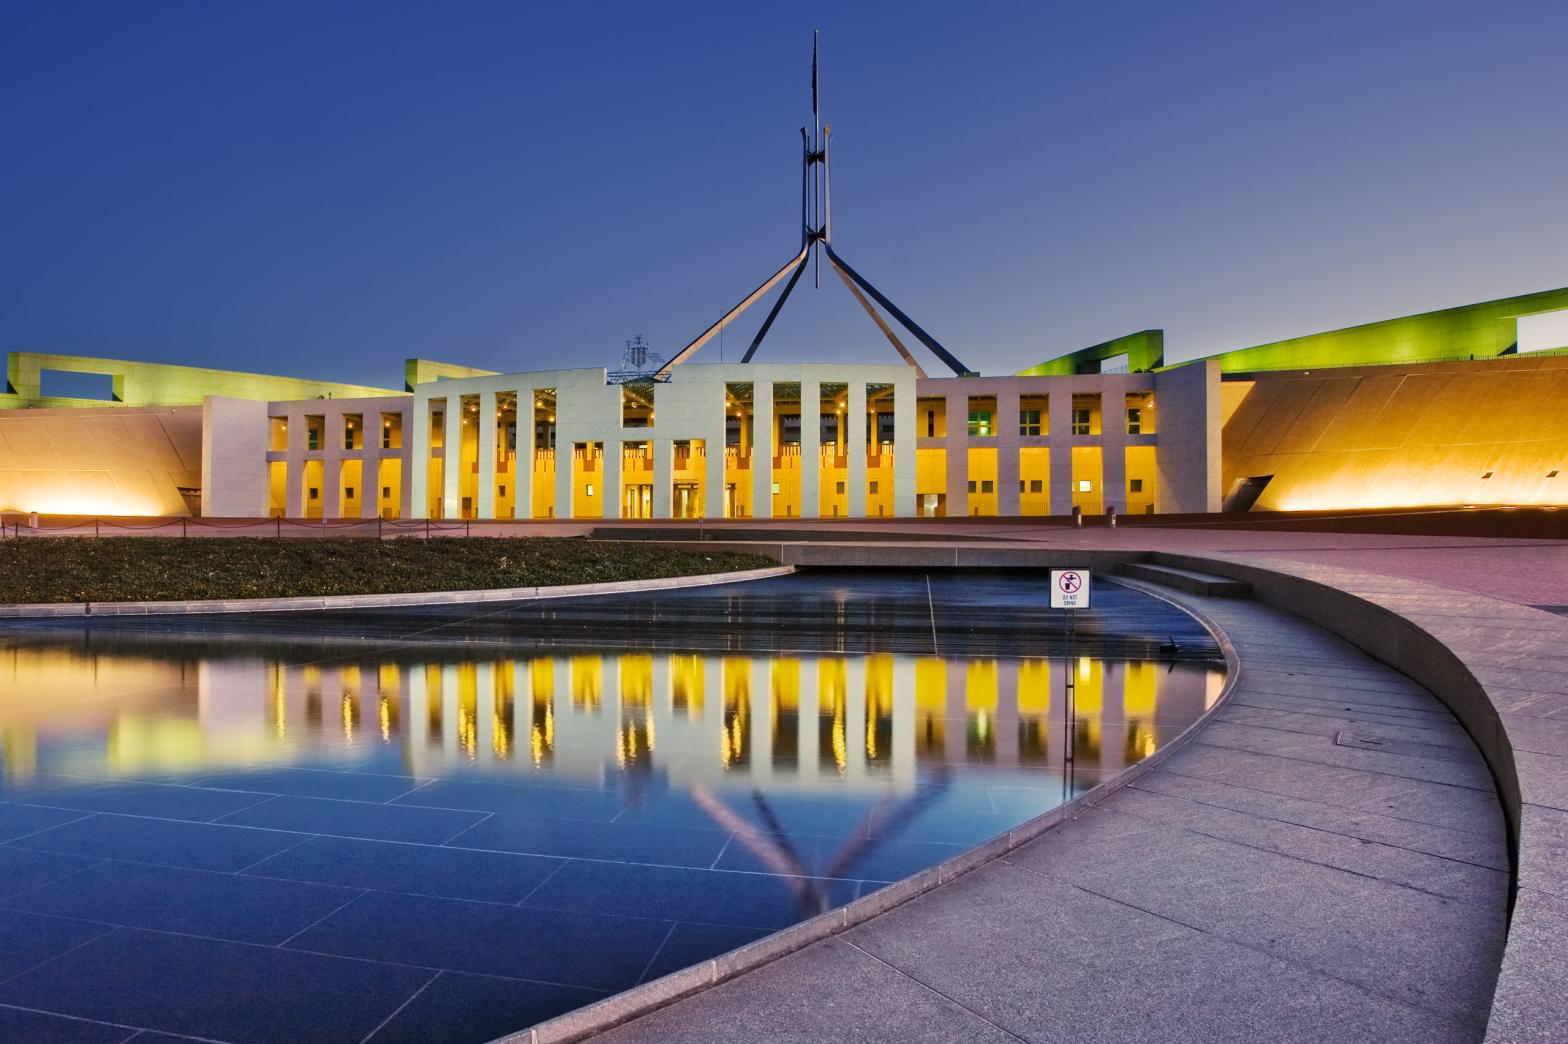 Parliament House is the target of a suspected cyber attack